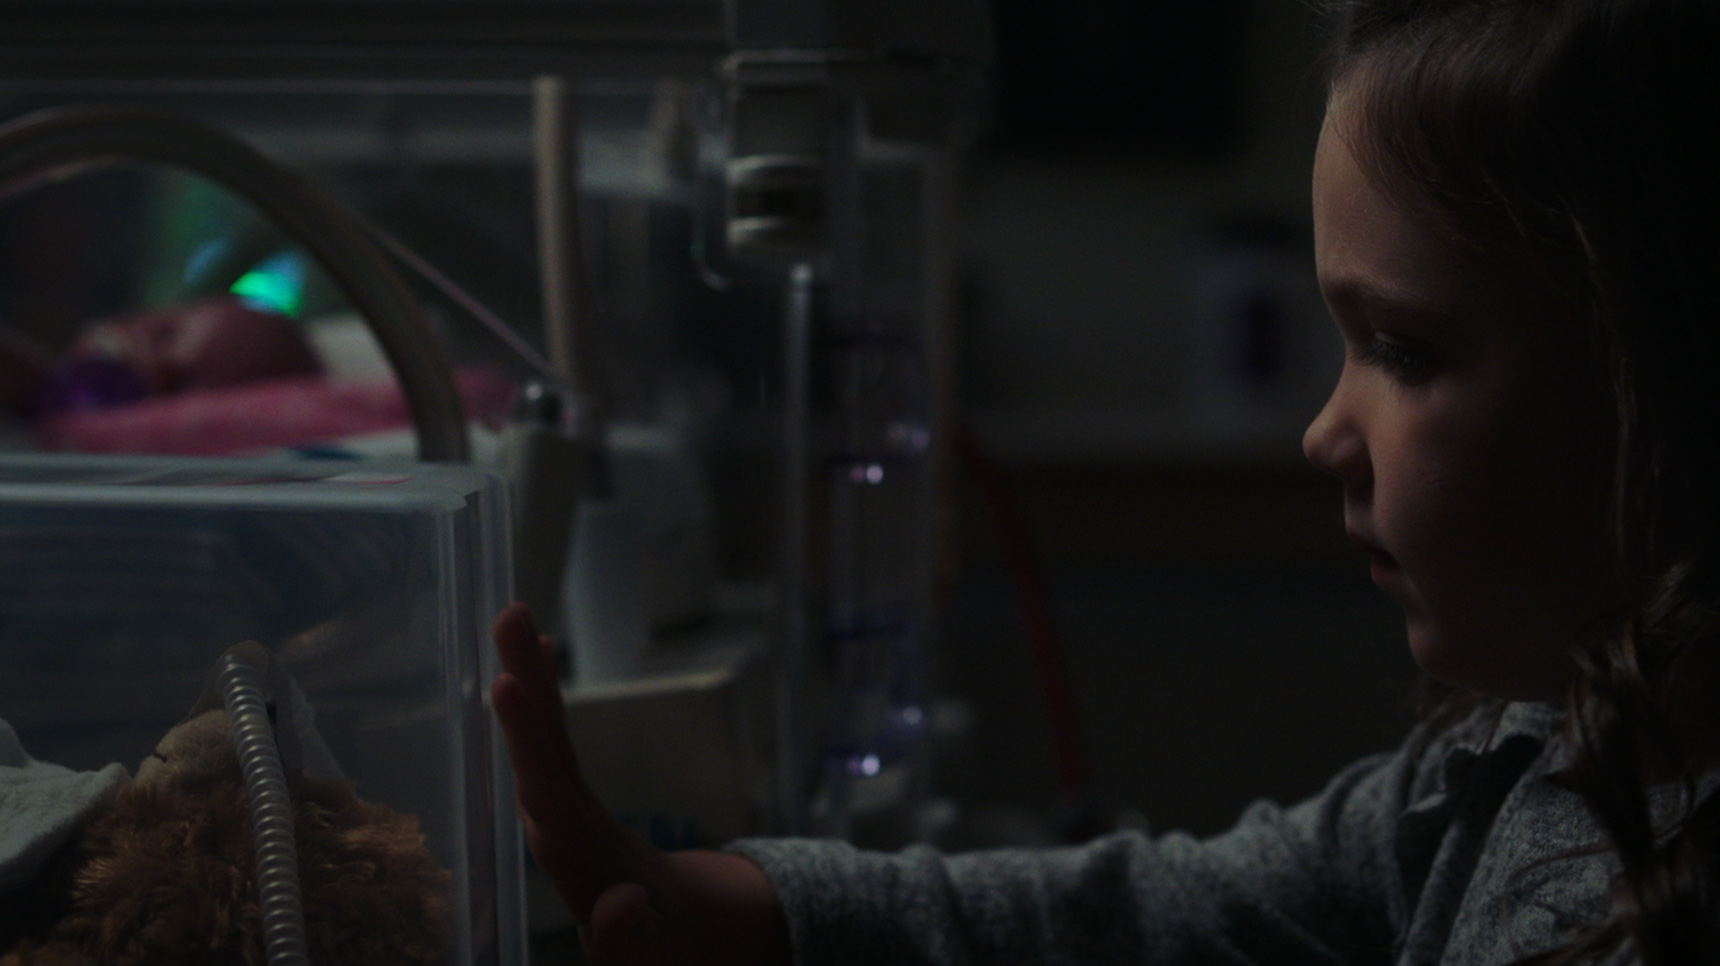 little girl looks into incubator where her preemie brother lies